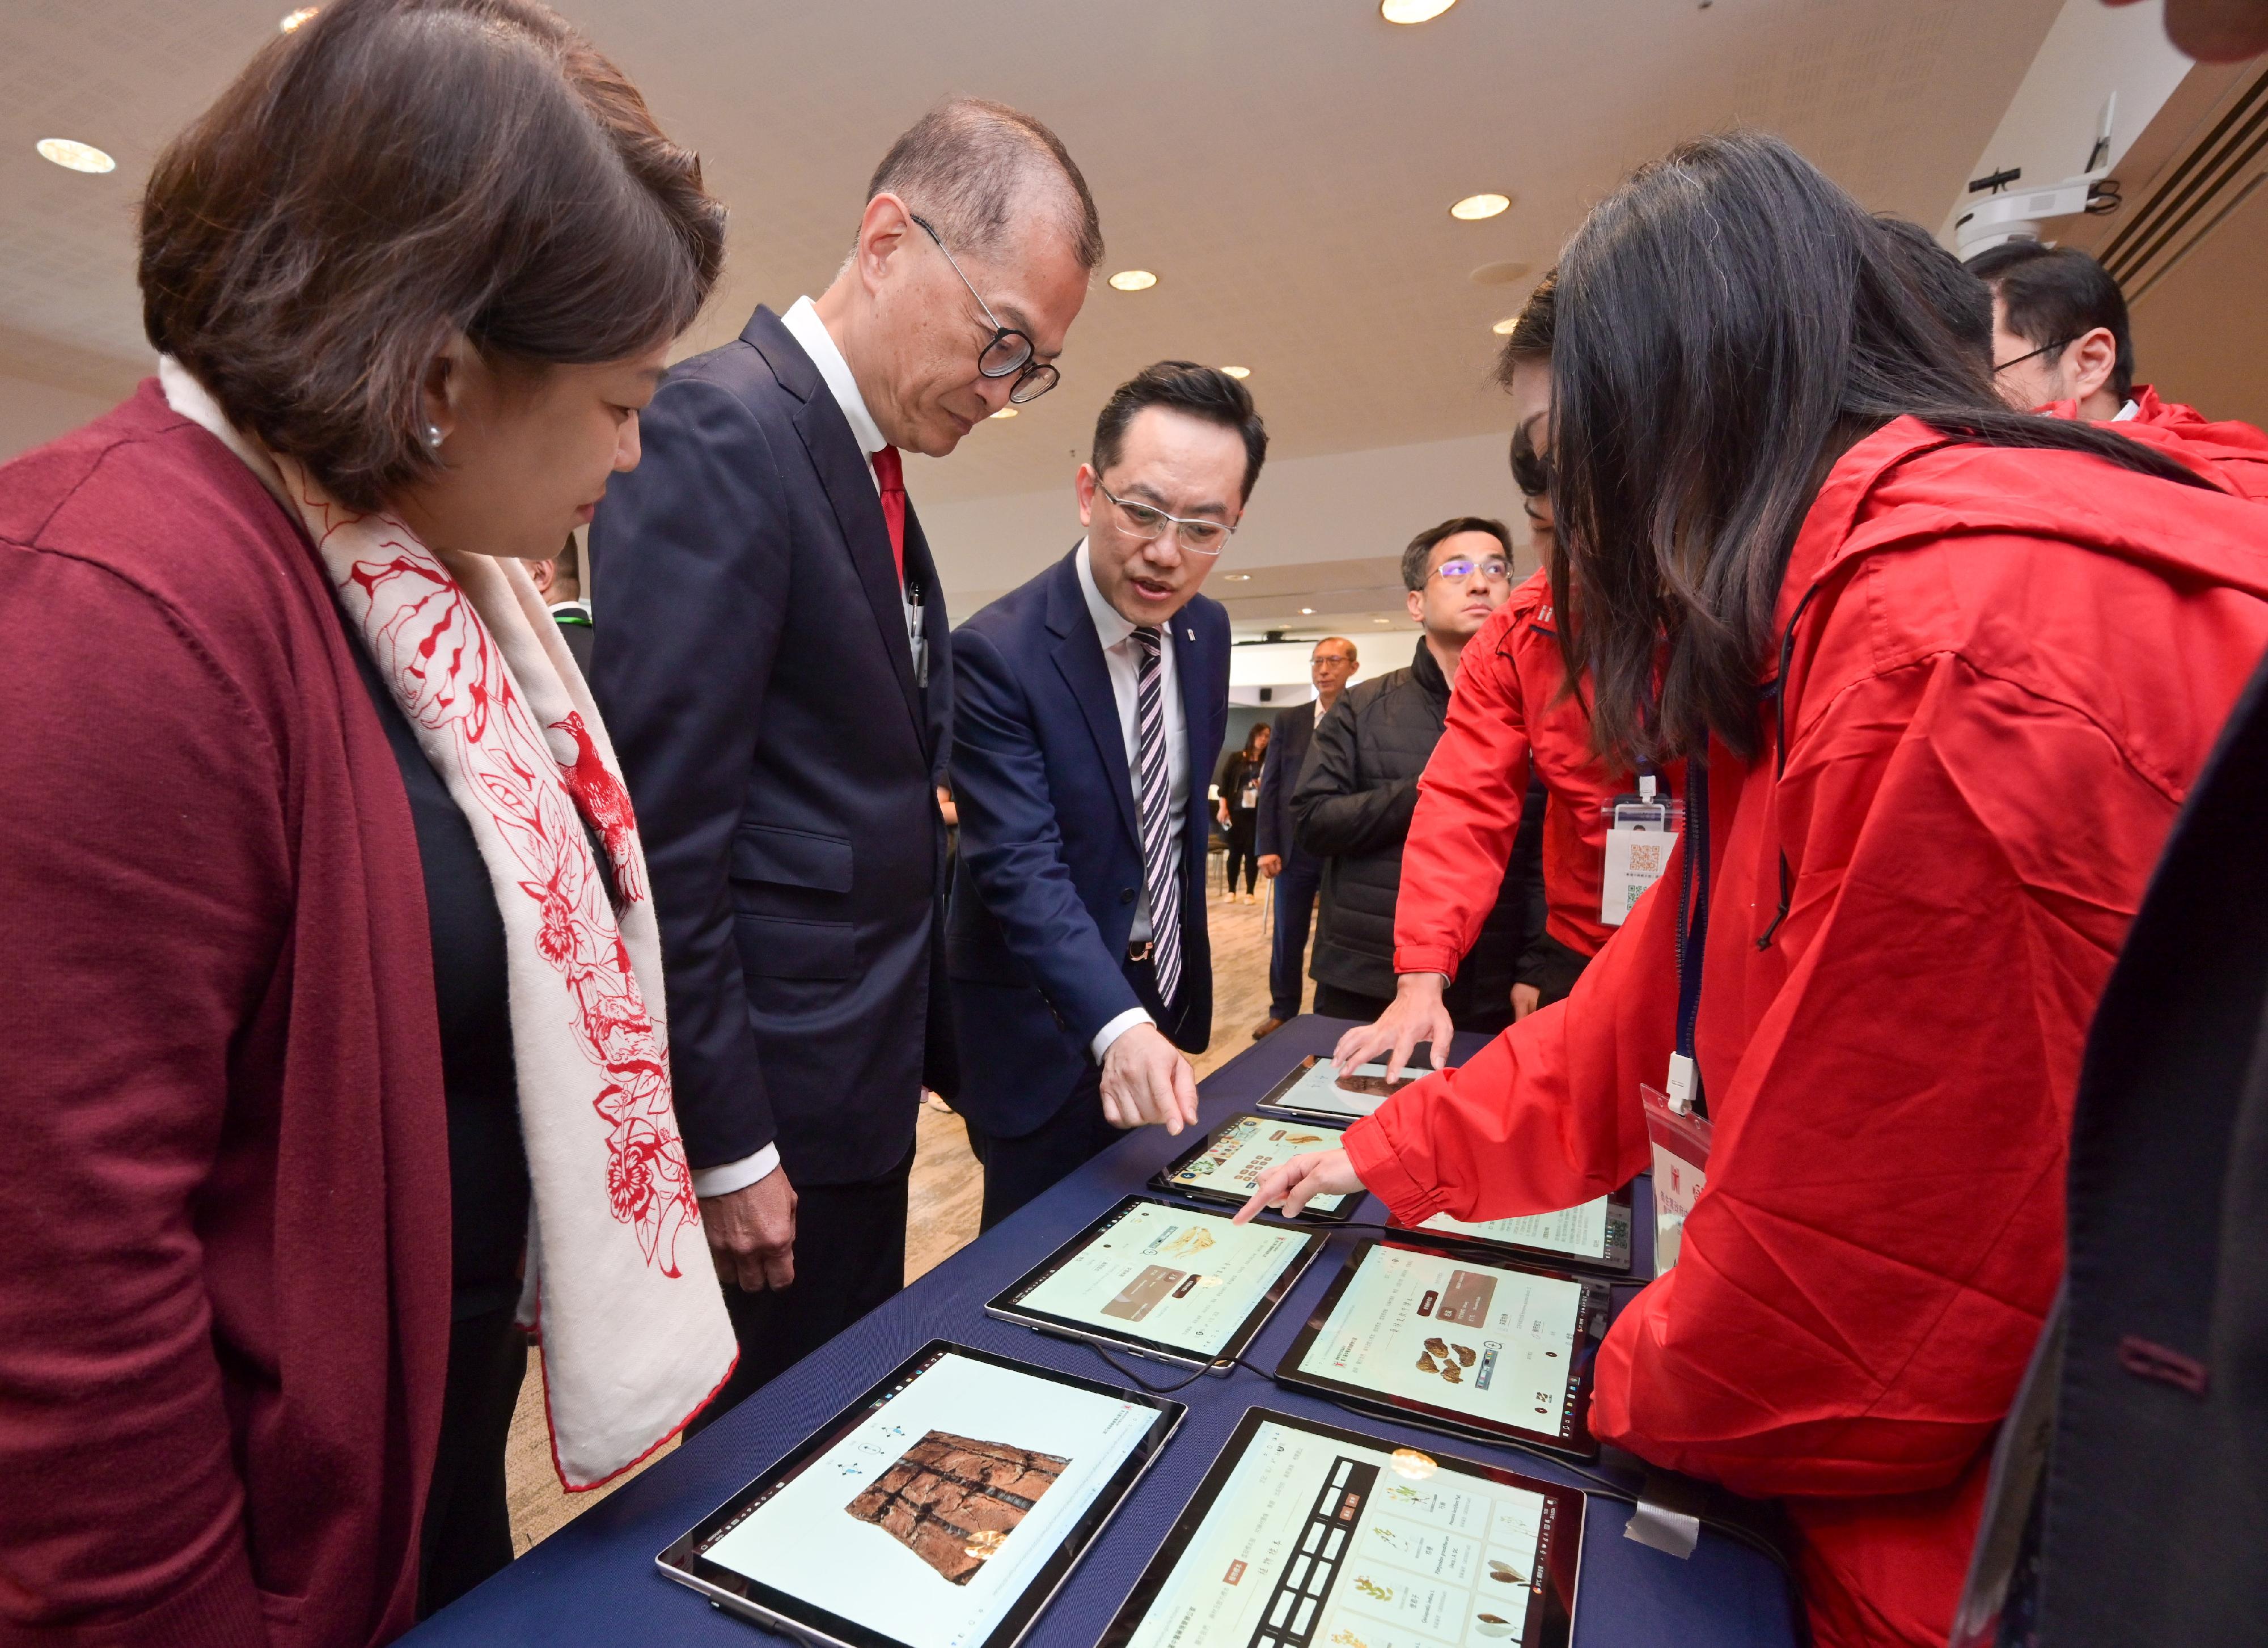 The Secretary for Health, Professor Lo Chung-mau, today (March 26) attended the launch ceremony of the Department of Health's new dedicated website Digital Herbarium for Chinese Medicines. Photo shows Professor Lo (second left); the Under Secretary for Health, Dr Libby Lee (first left); and the Director of Health, Dr Ronald Lam (third left); browsing the dedicated website Digital Herbarium for Chinese Medicines.